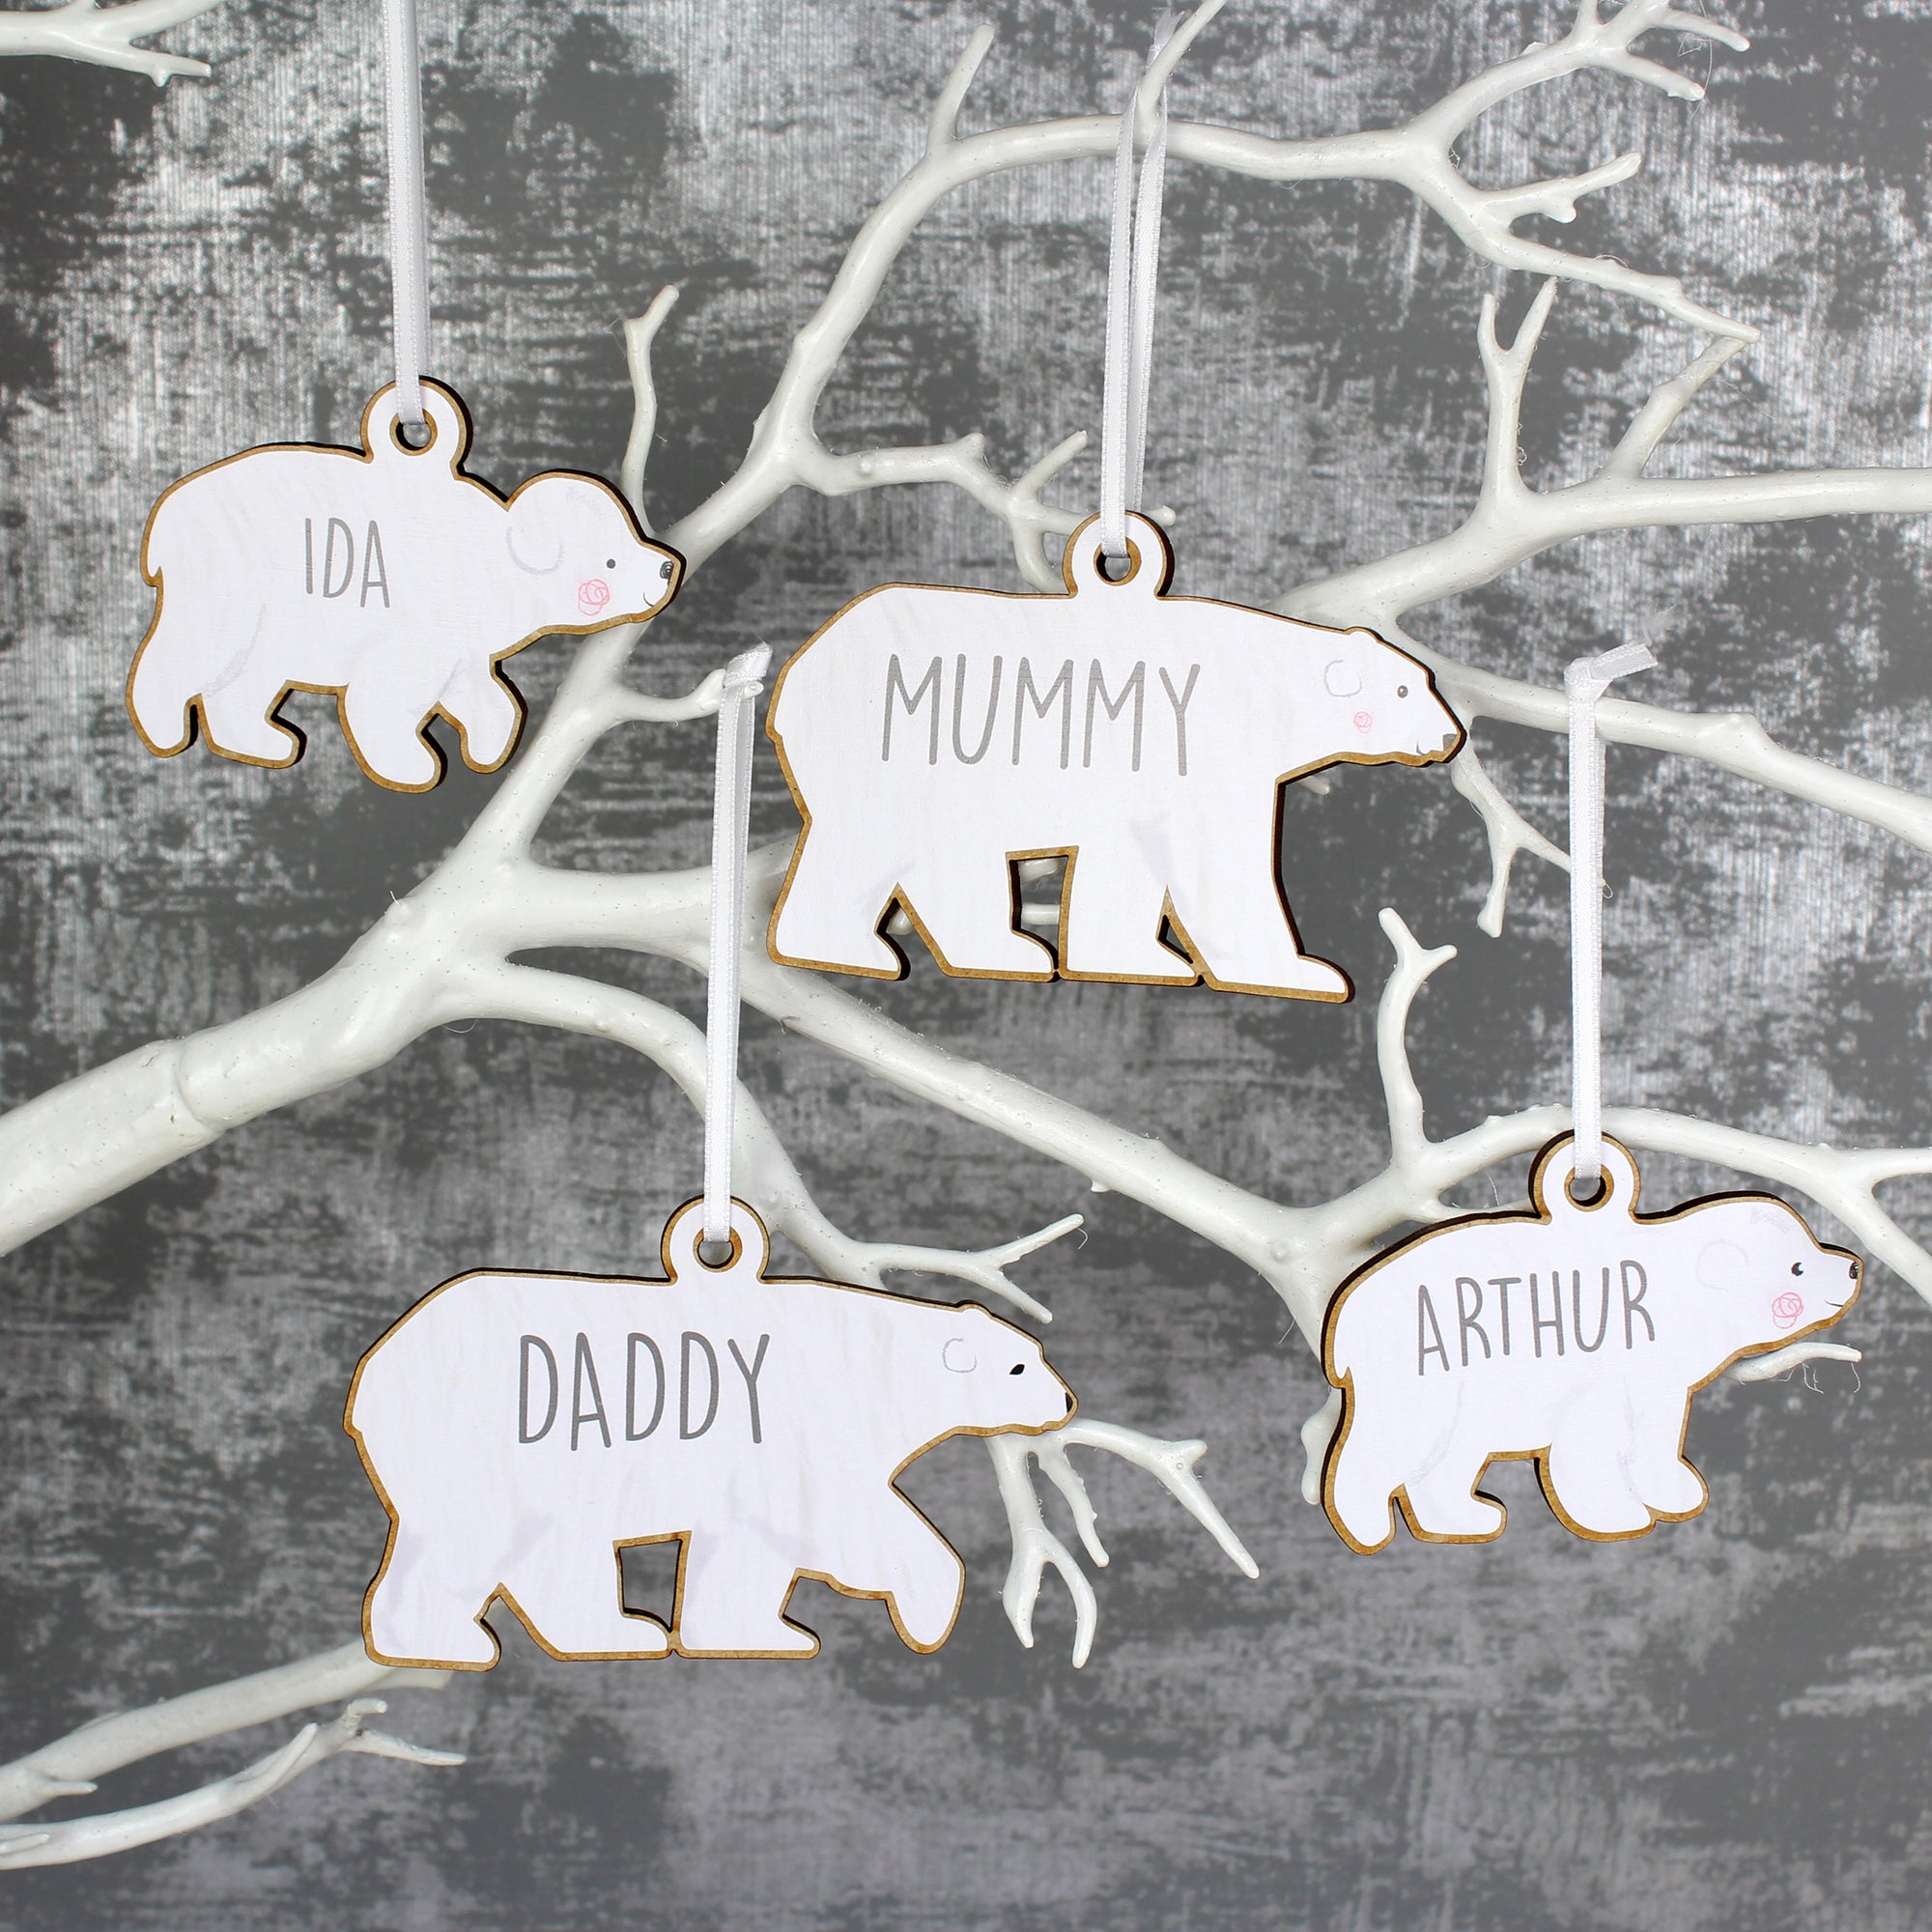 Personalised family set of four wooden polar bear decorations with two adults and two baby bears. Each bear is painted white and can be personalised with a name of up to 12 characters which will be printed on each bear in a modern grey uppercase font.